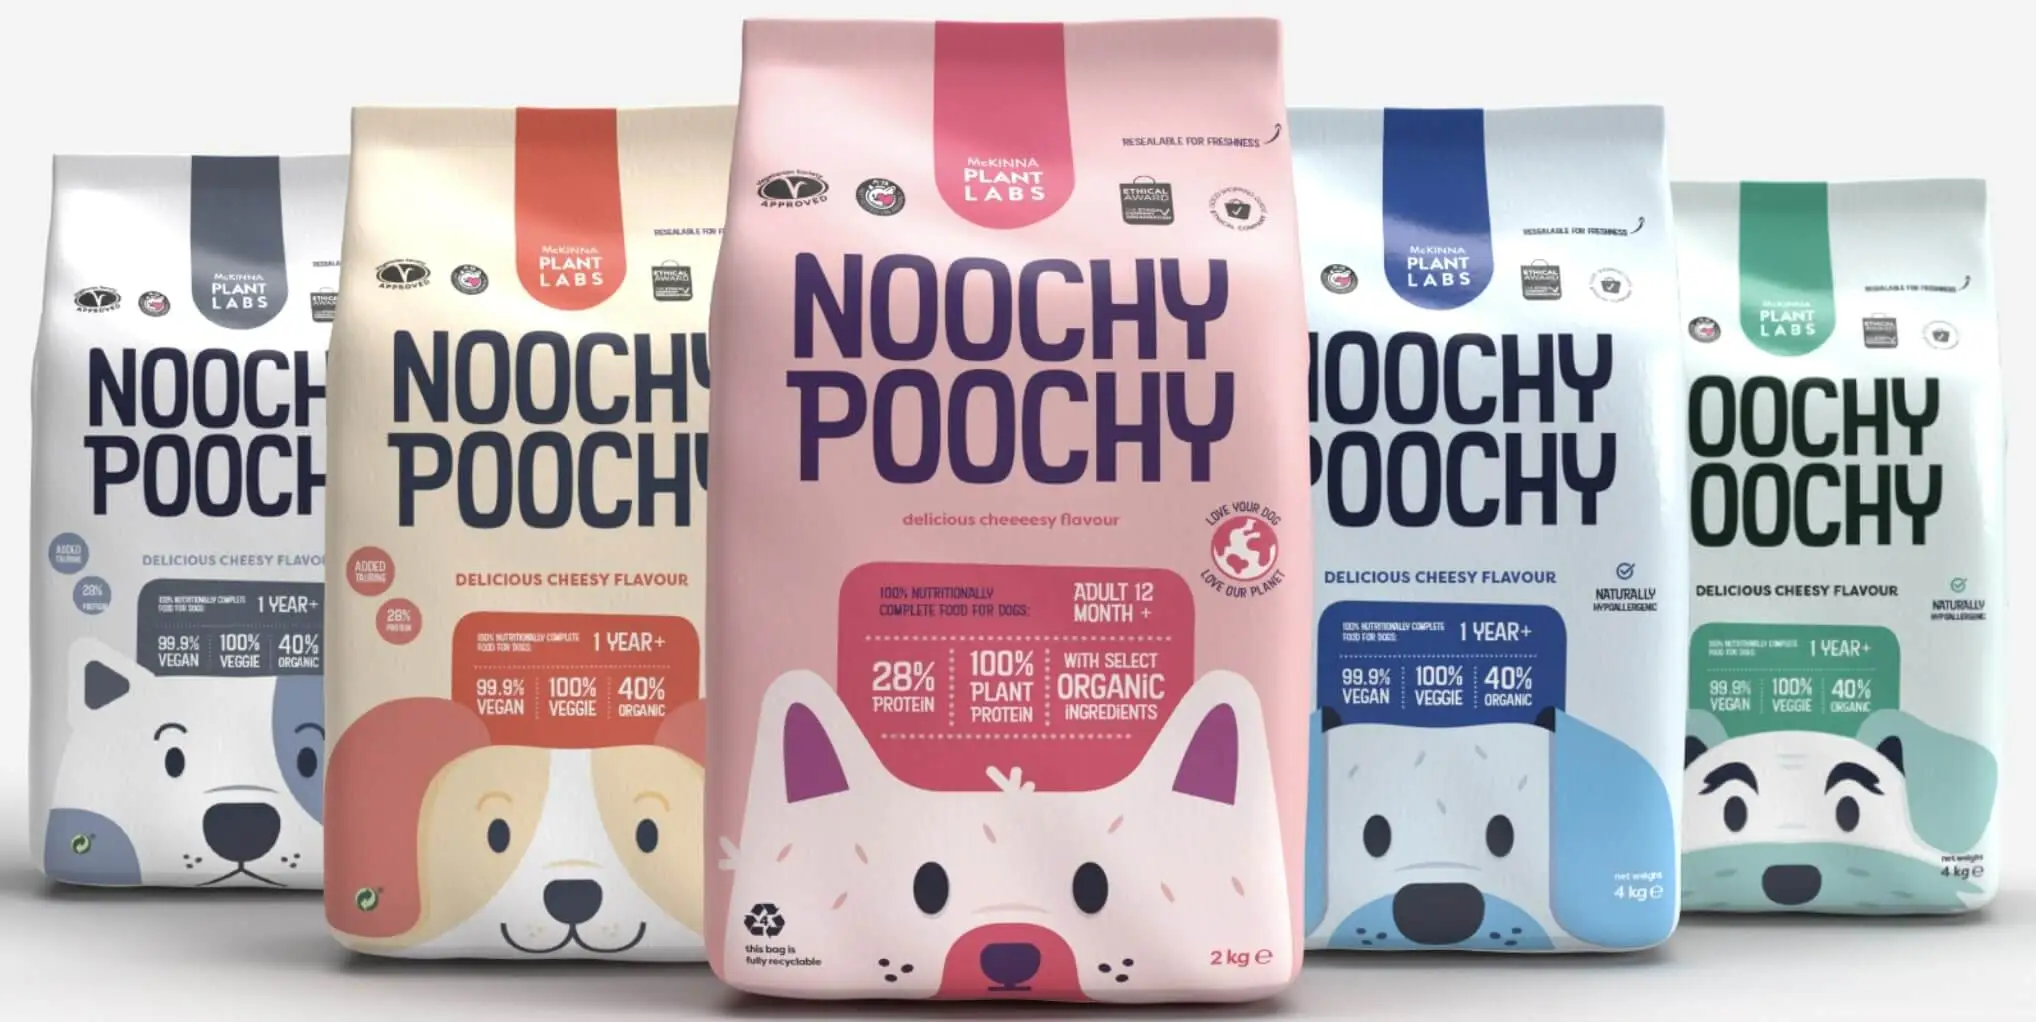 Noochy Poochy product packaging